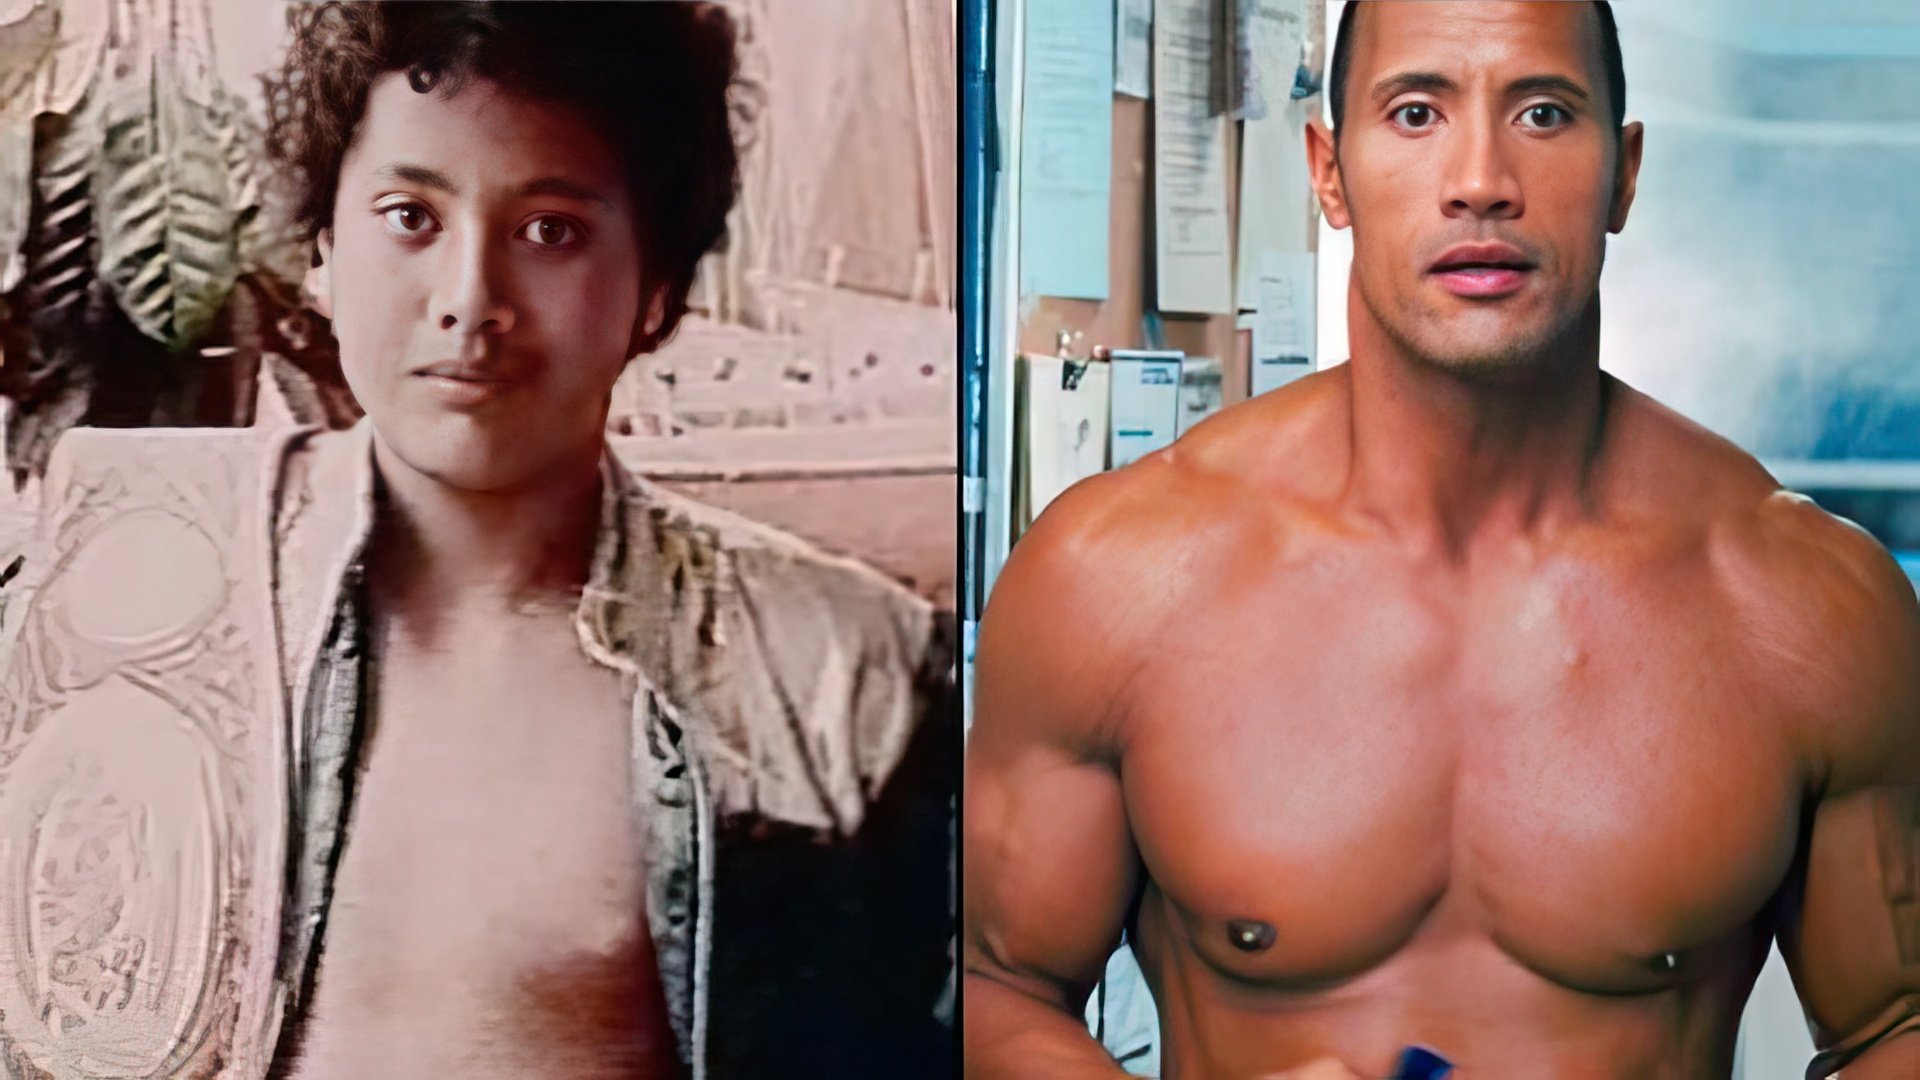 Dwayne Johnson in his youth and young adulthood